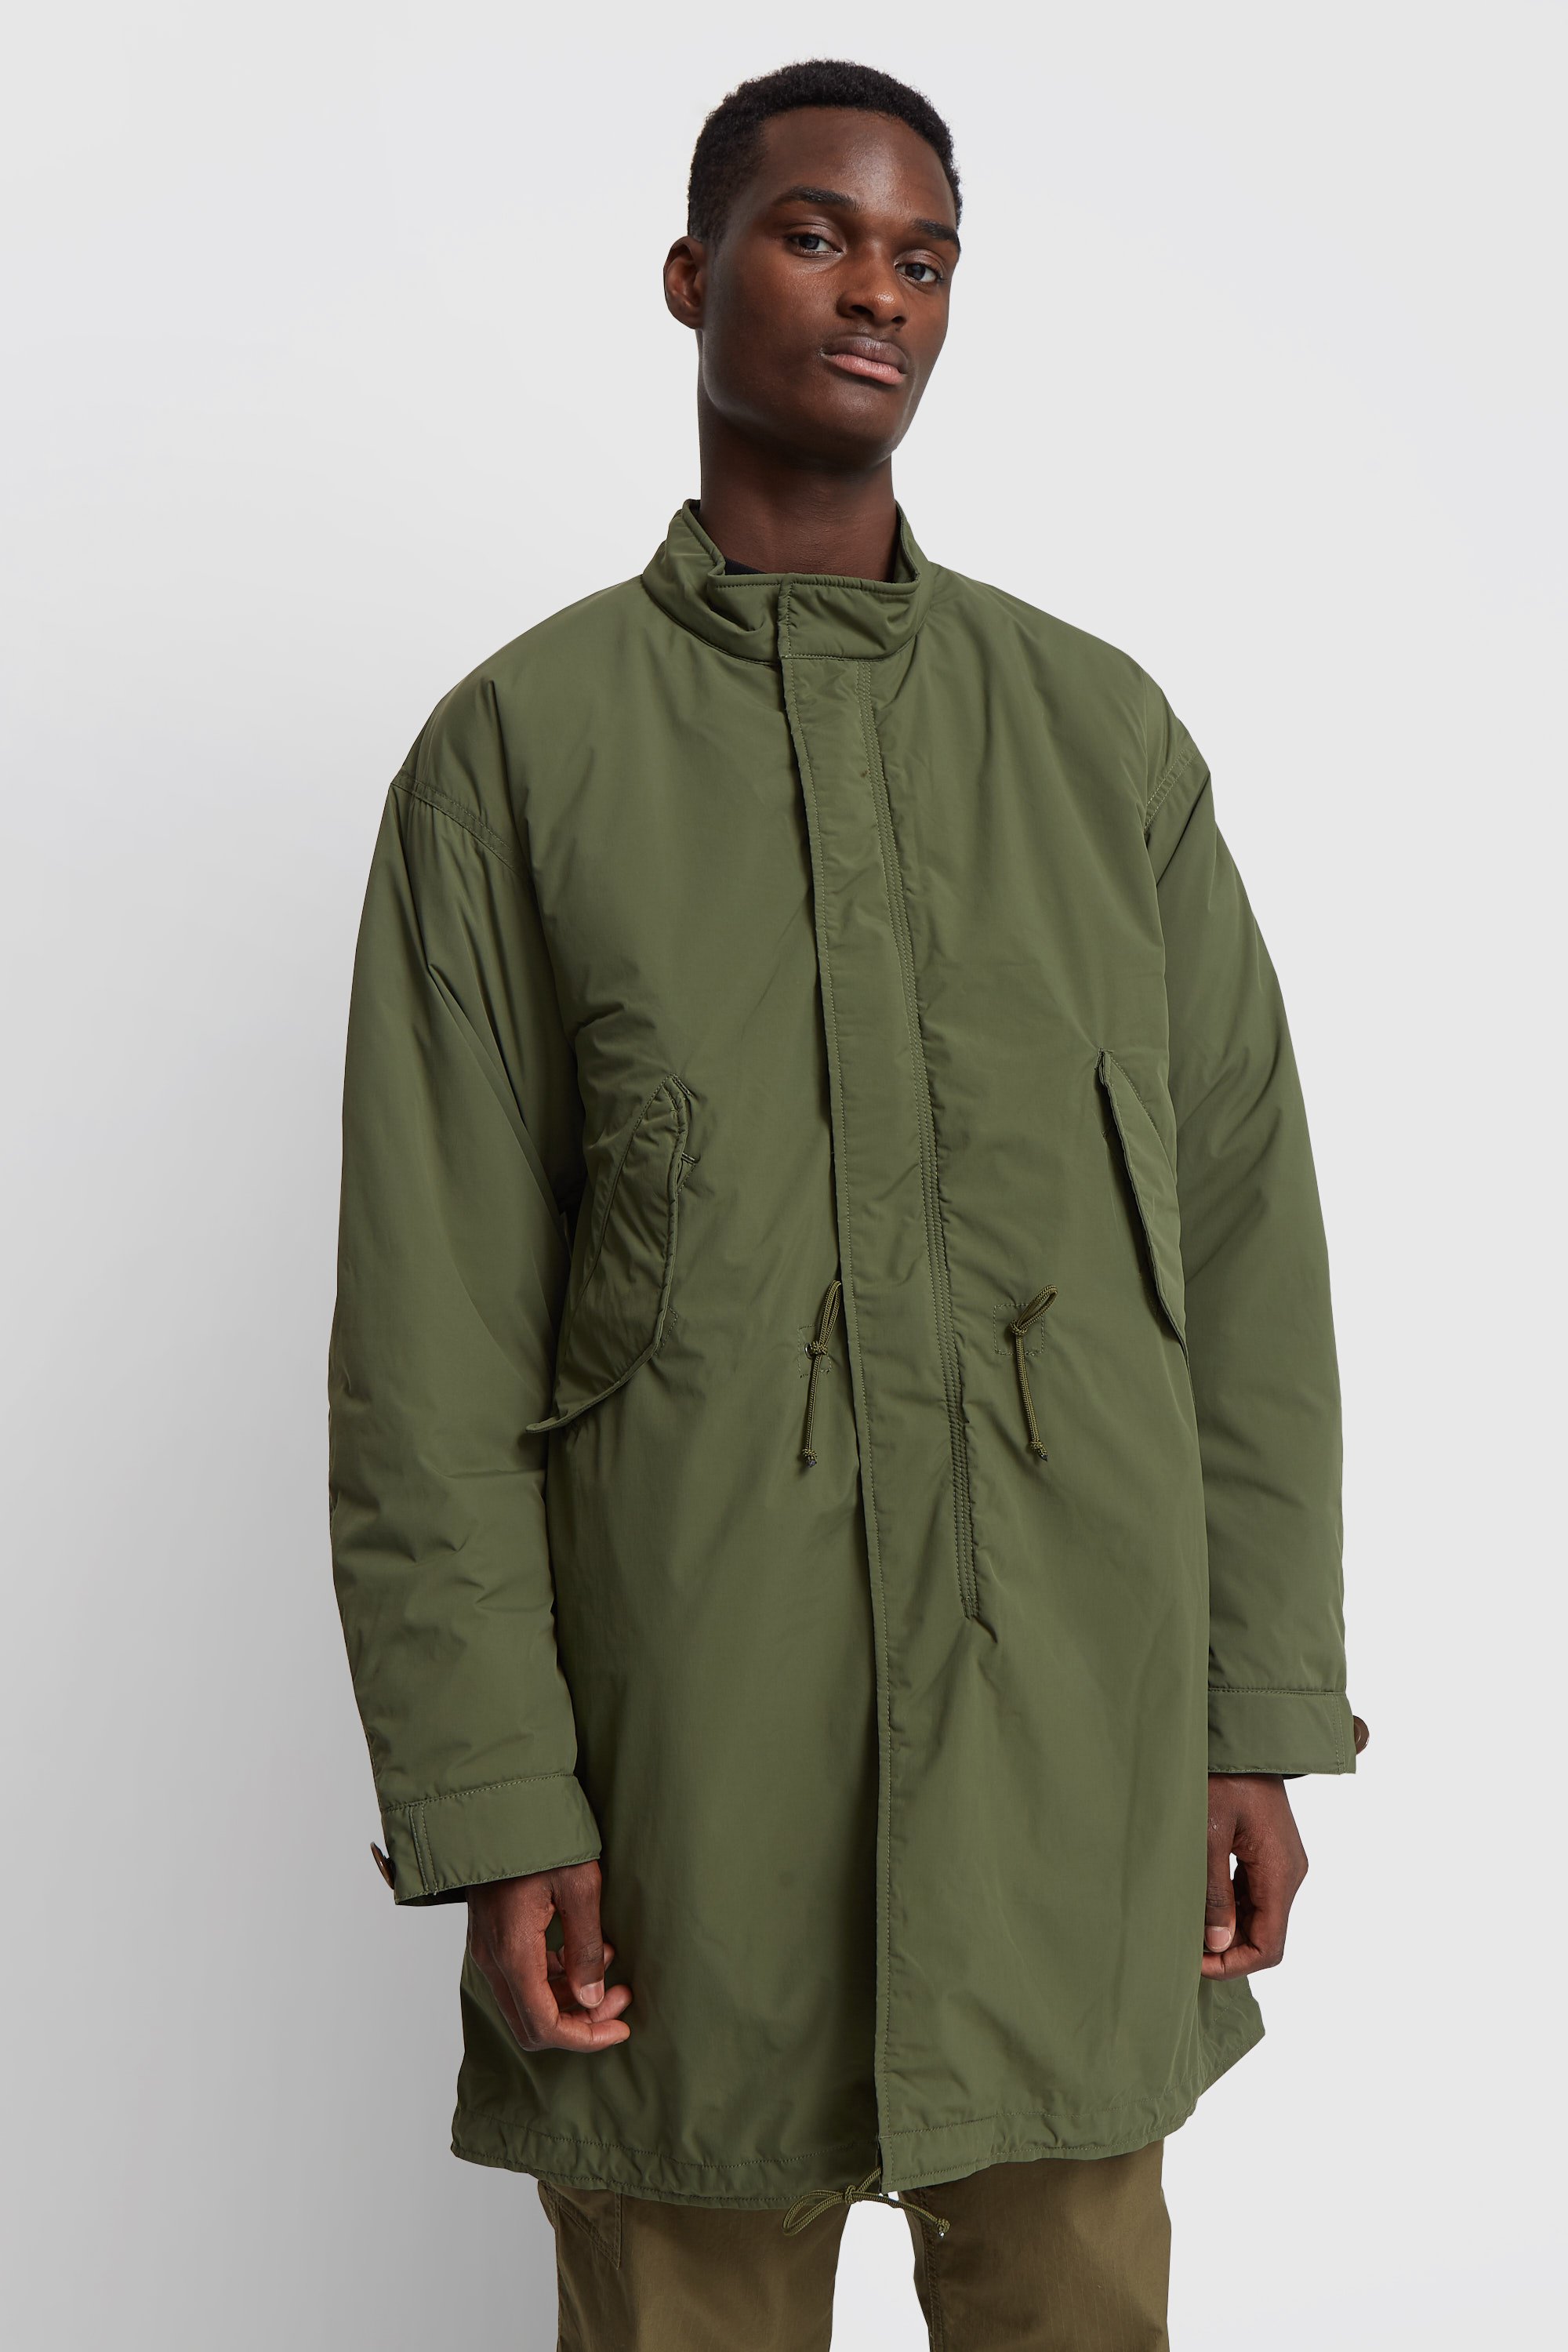 Beams Plus M65 Type Jacket - The Best Picture Of Beam